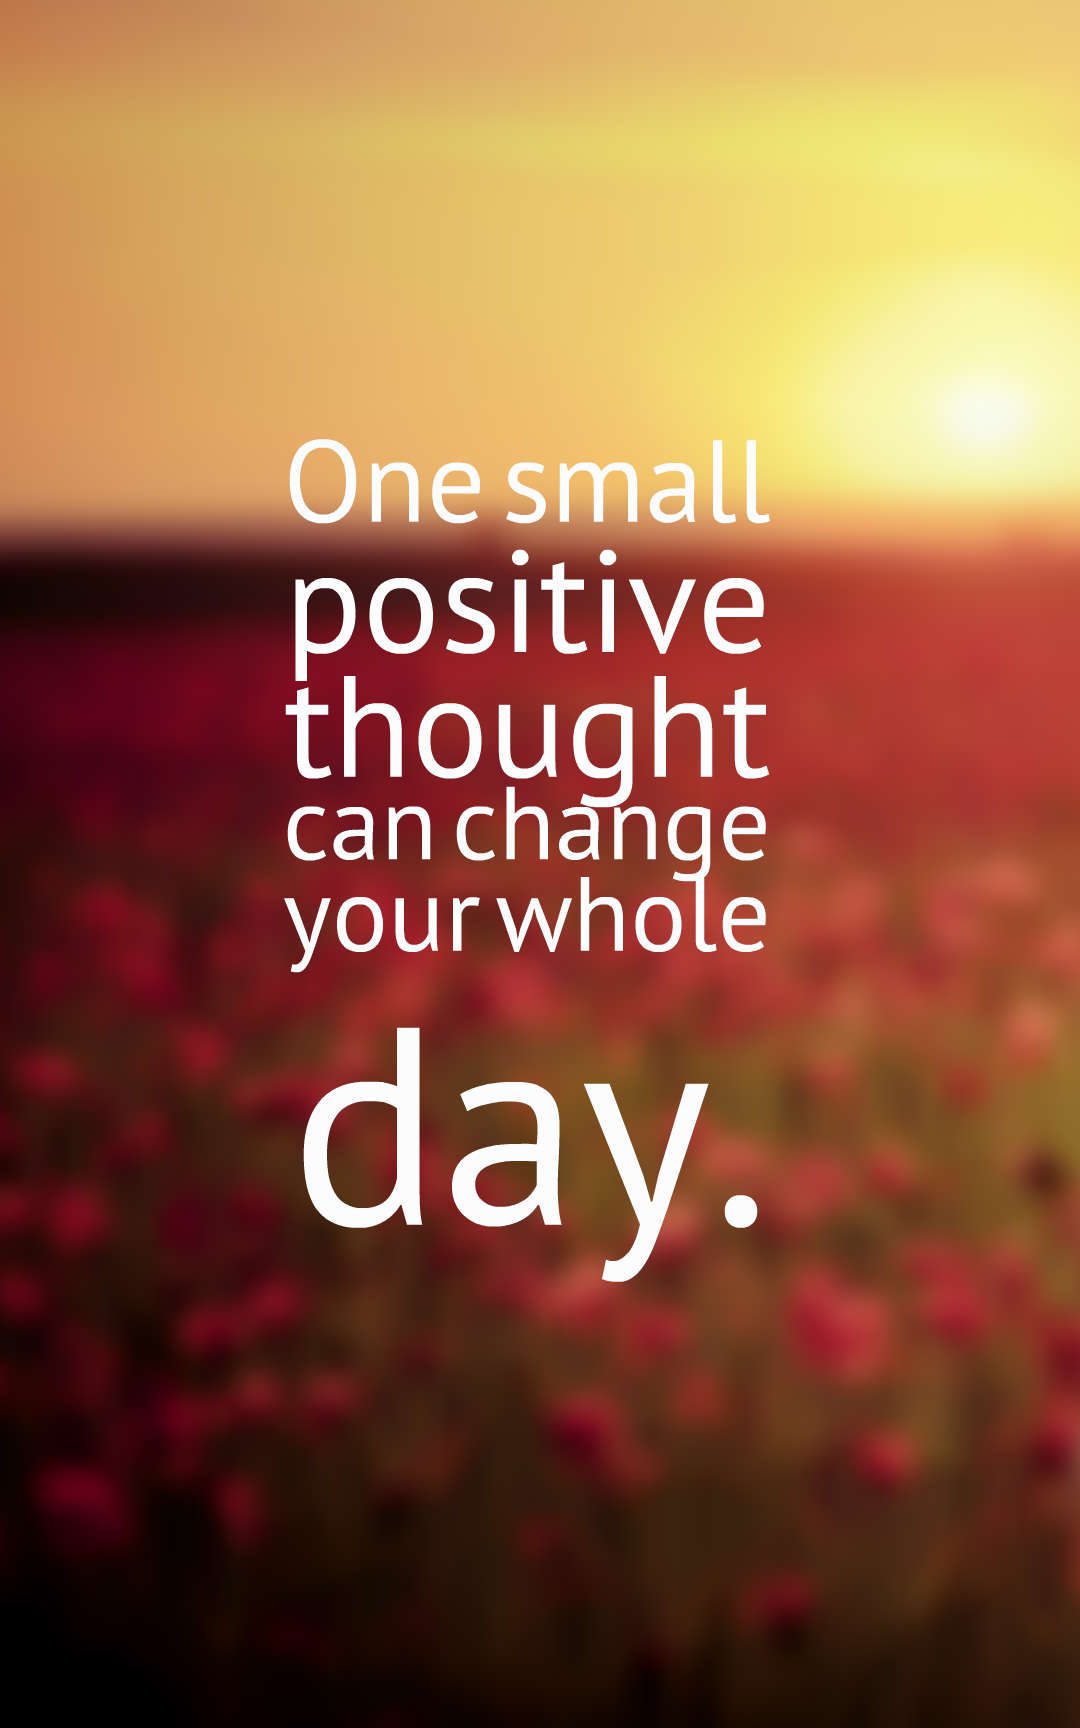 One small positive thought can change your whole day.